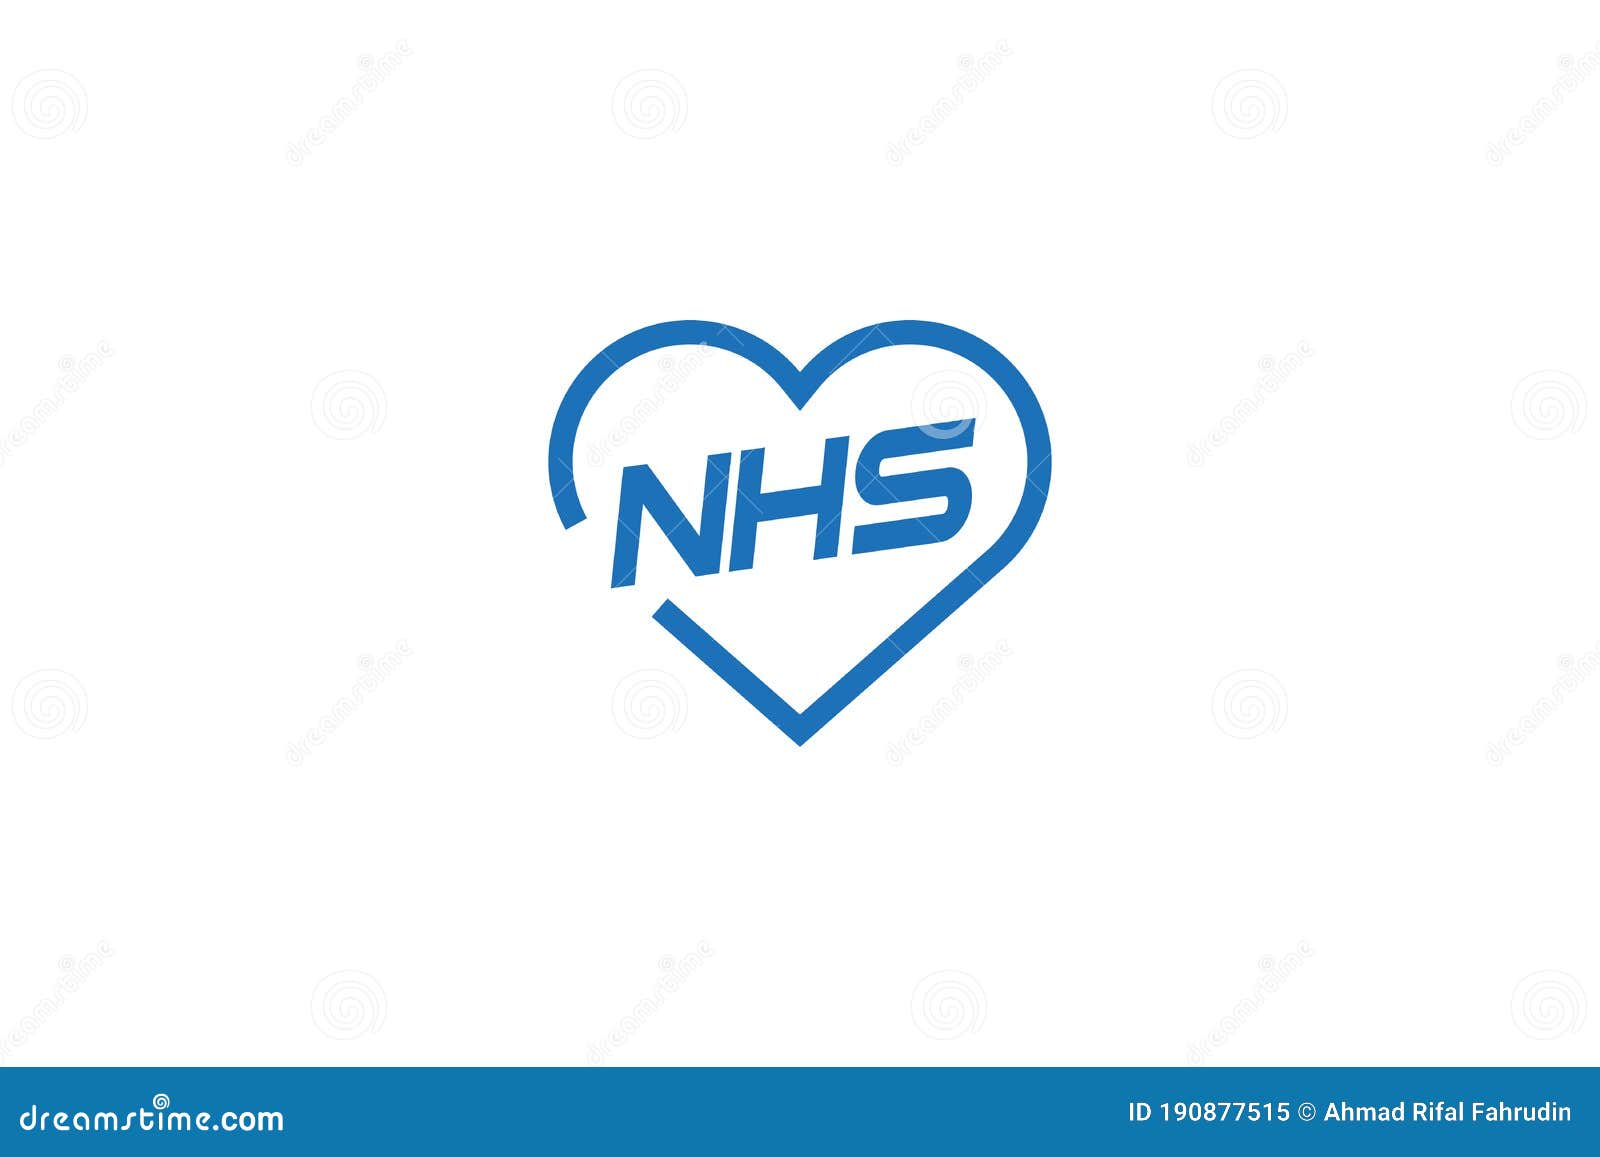 nhs logo  . letter nhs in the hearth  logo  .  